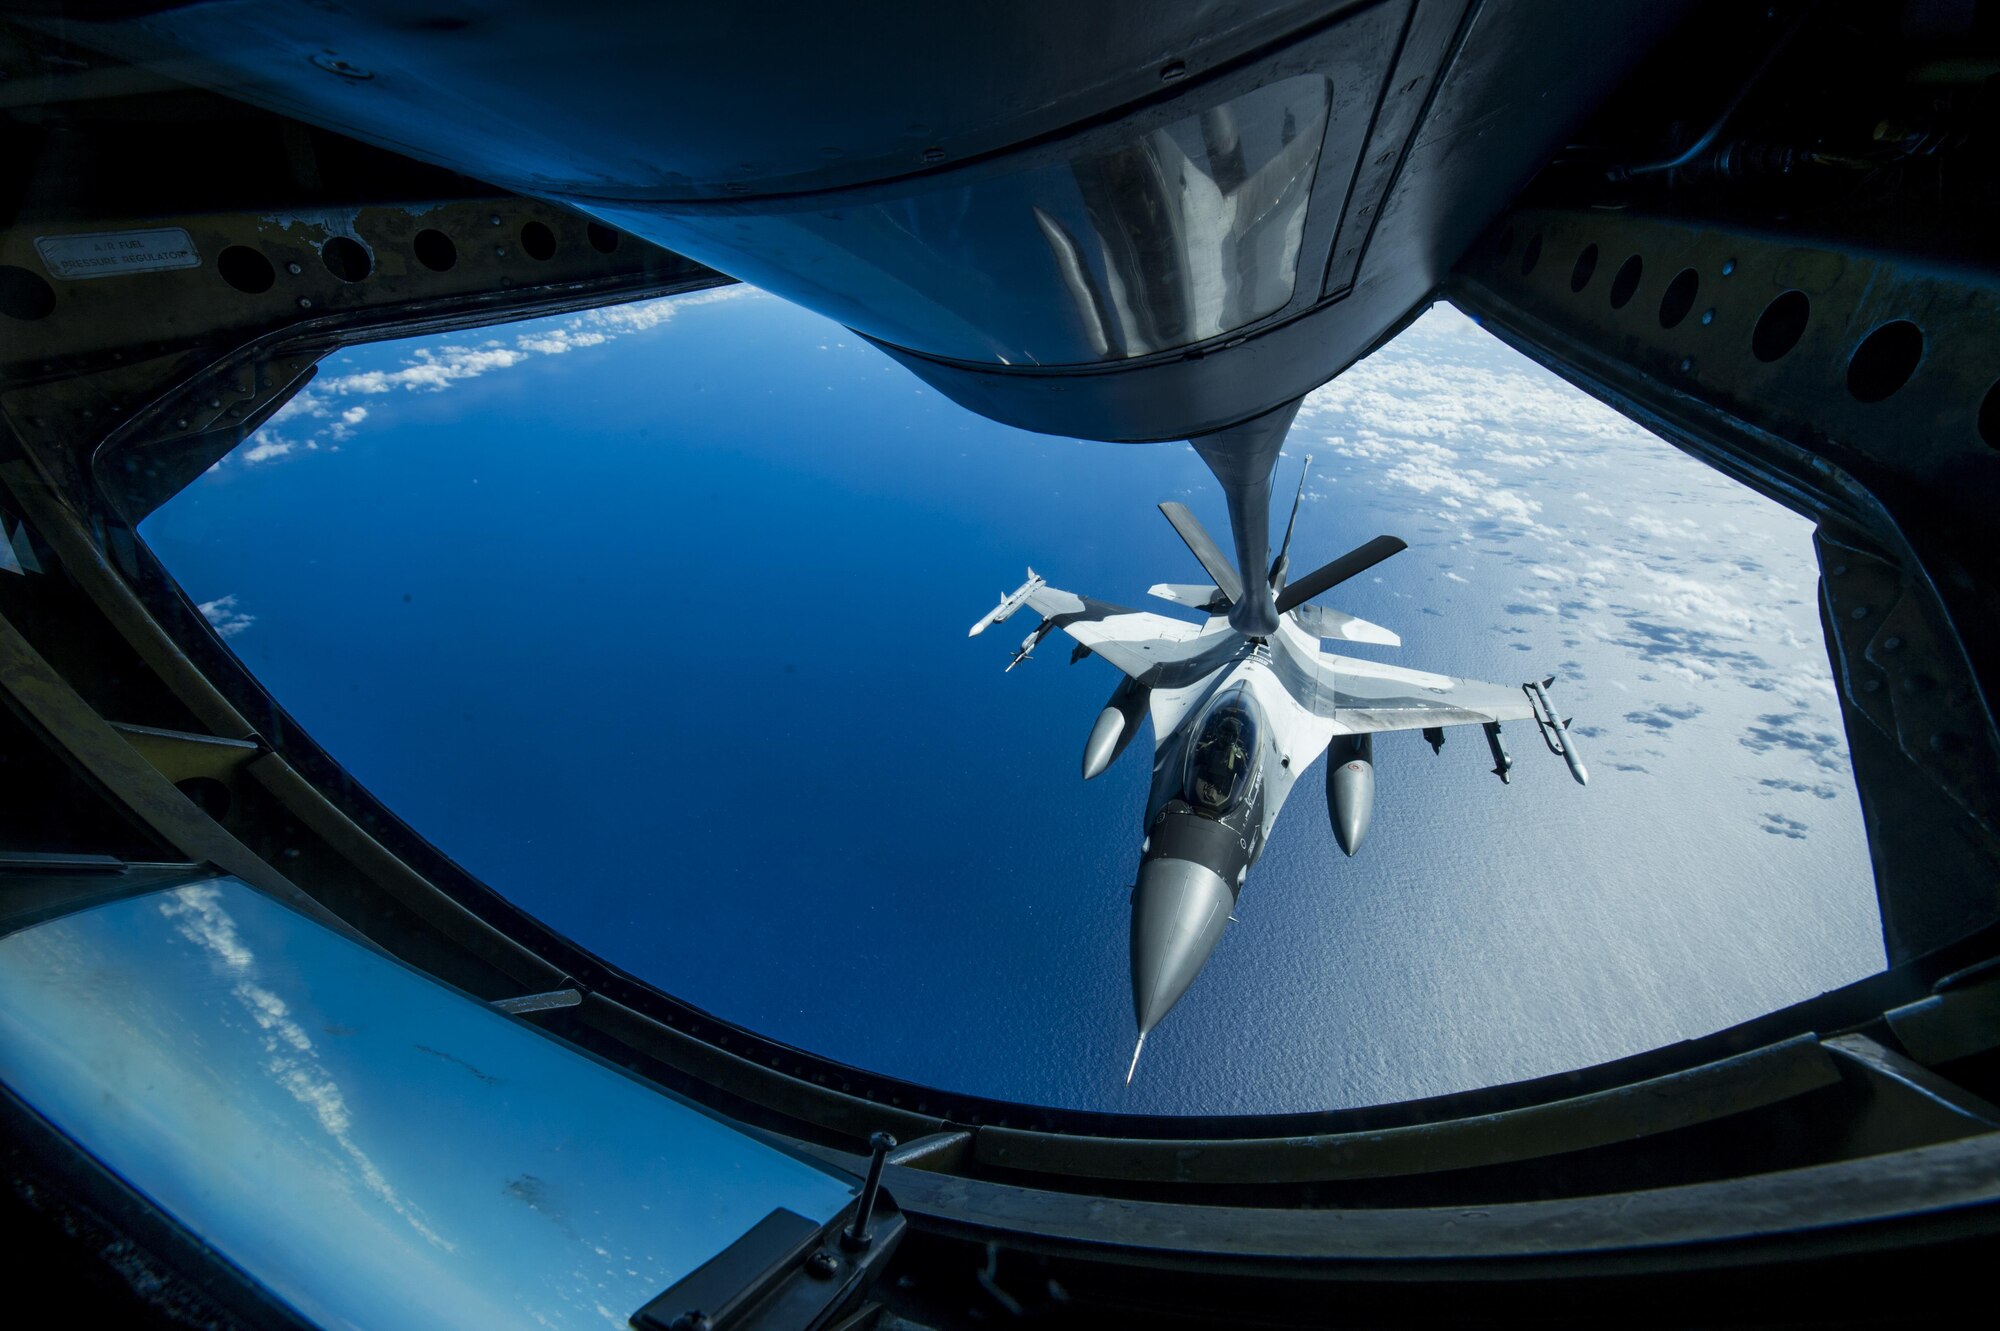 A U.S. Air Force F-16 Fighting Falcon assigned to the 18th Aggressor Squadron receives in-flight fuel from a U.S. Air Force KC-135 Stratotanker during Cope North 17, March 2, 2017. The exercise includes 22 total flying units and more than 2,700 personnel from three countries and continues the growth of strong, interoperable relationships within the Indo-Asia-Pacific region through integration of airborne and land-based command and control assets. (U.S. Air Force photo by Staff Sgt. Keith James)